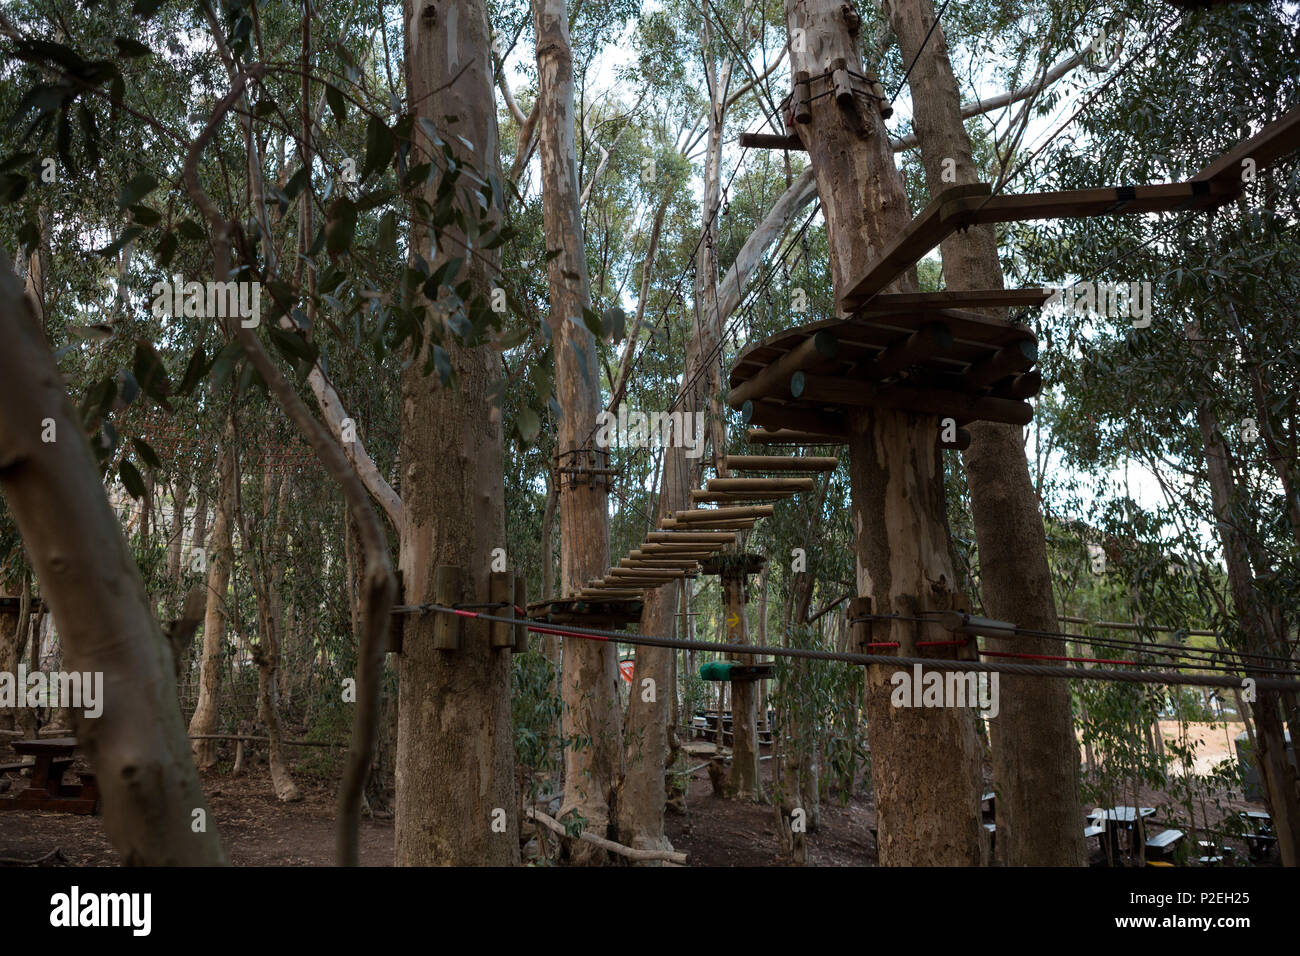 A view of wooden obstacles in the forest Stock Photo